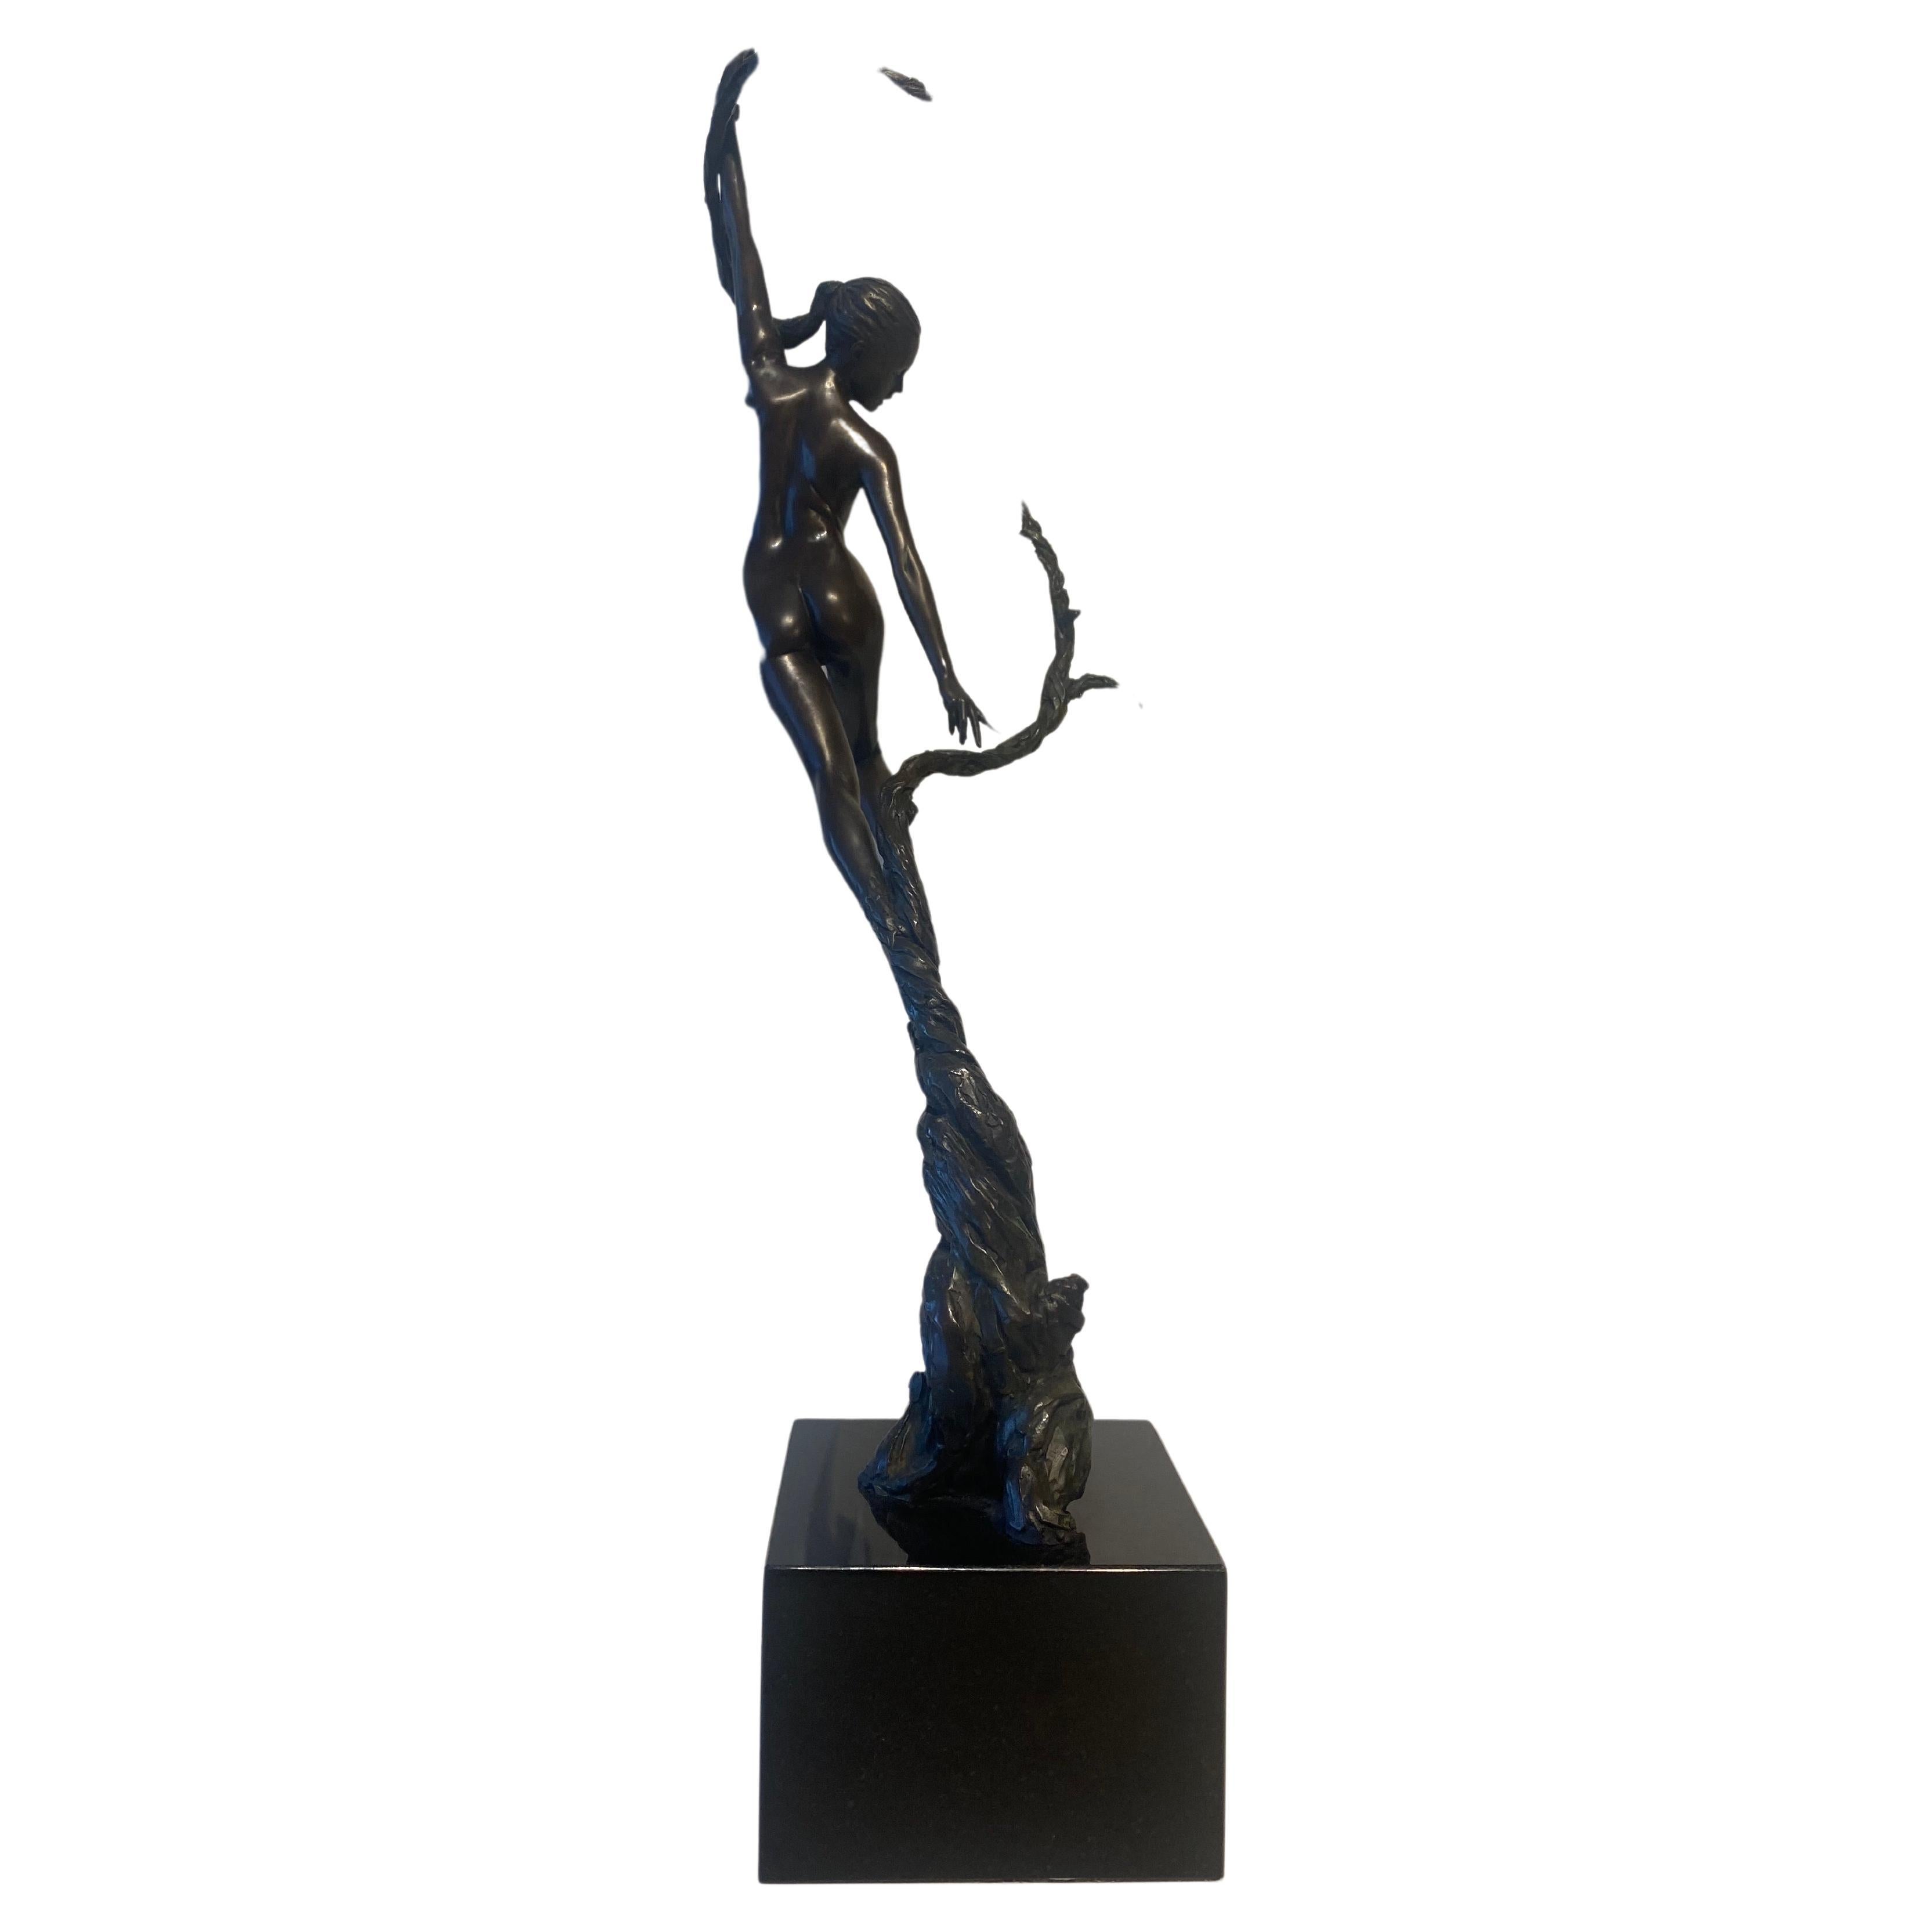 Neil Welch. 
A Large bronze sculpture Titled Natures Grace - Limited Edition 25 and this is number 1 of 25 This is the very first casting and is signed Neil Welch on the base. 
Yes that's right this was the very first cast of this amazing and